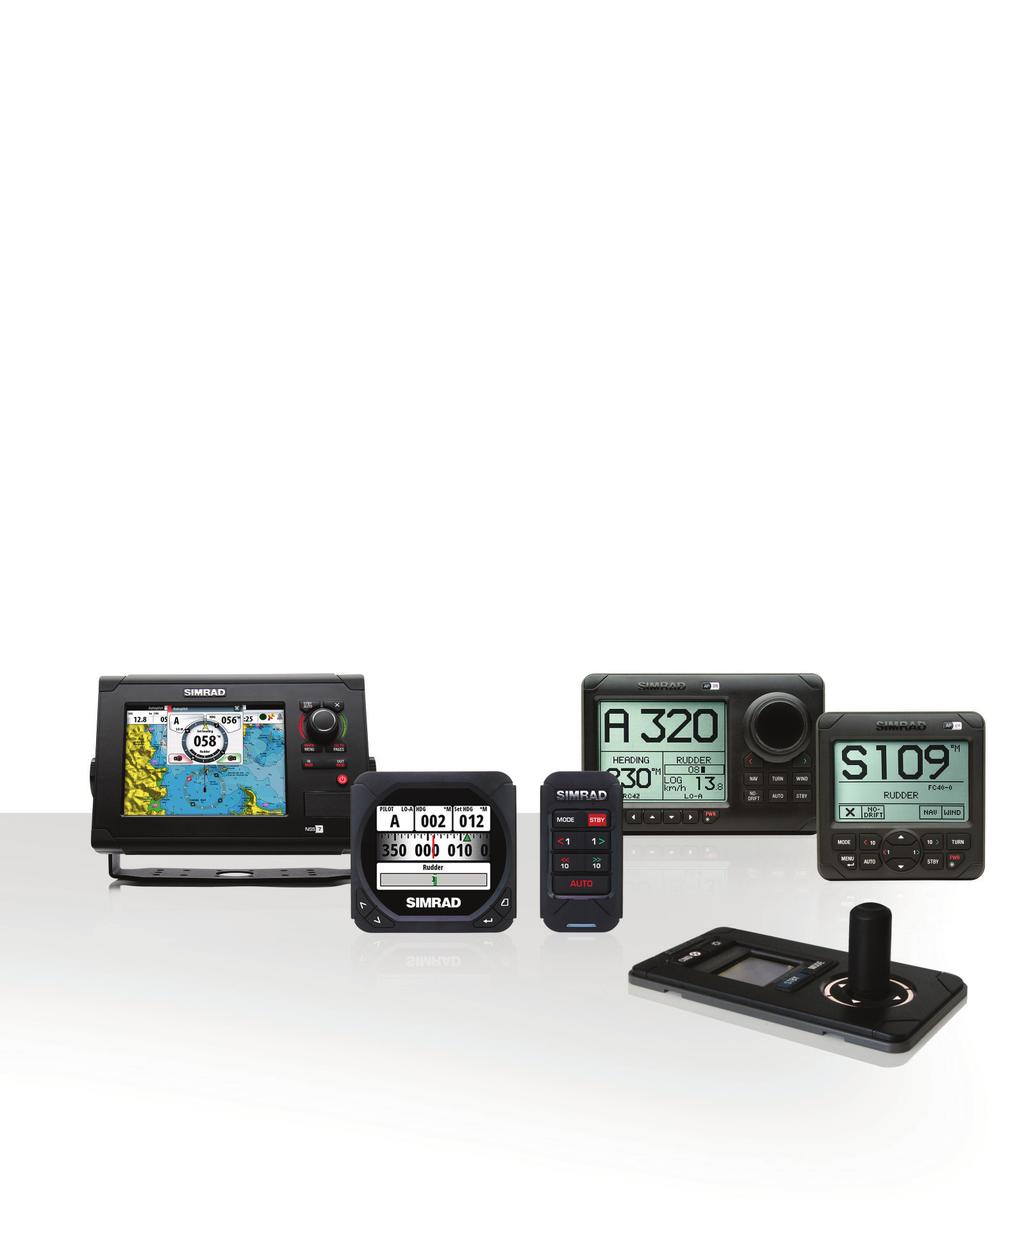 DESIGNED TO STEER YOUR BOAT With dedicated autopilot button, rotary-dial steering on TouchSensible models, and full on-screen autopilot controls, our multifunction displays are all you need to